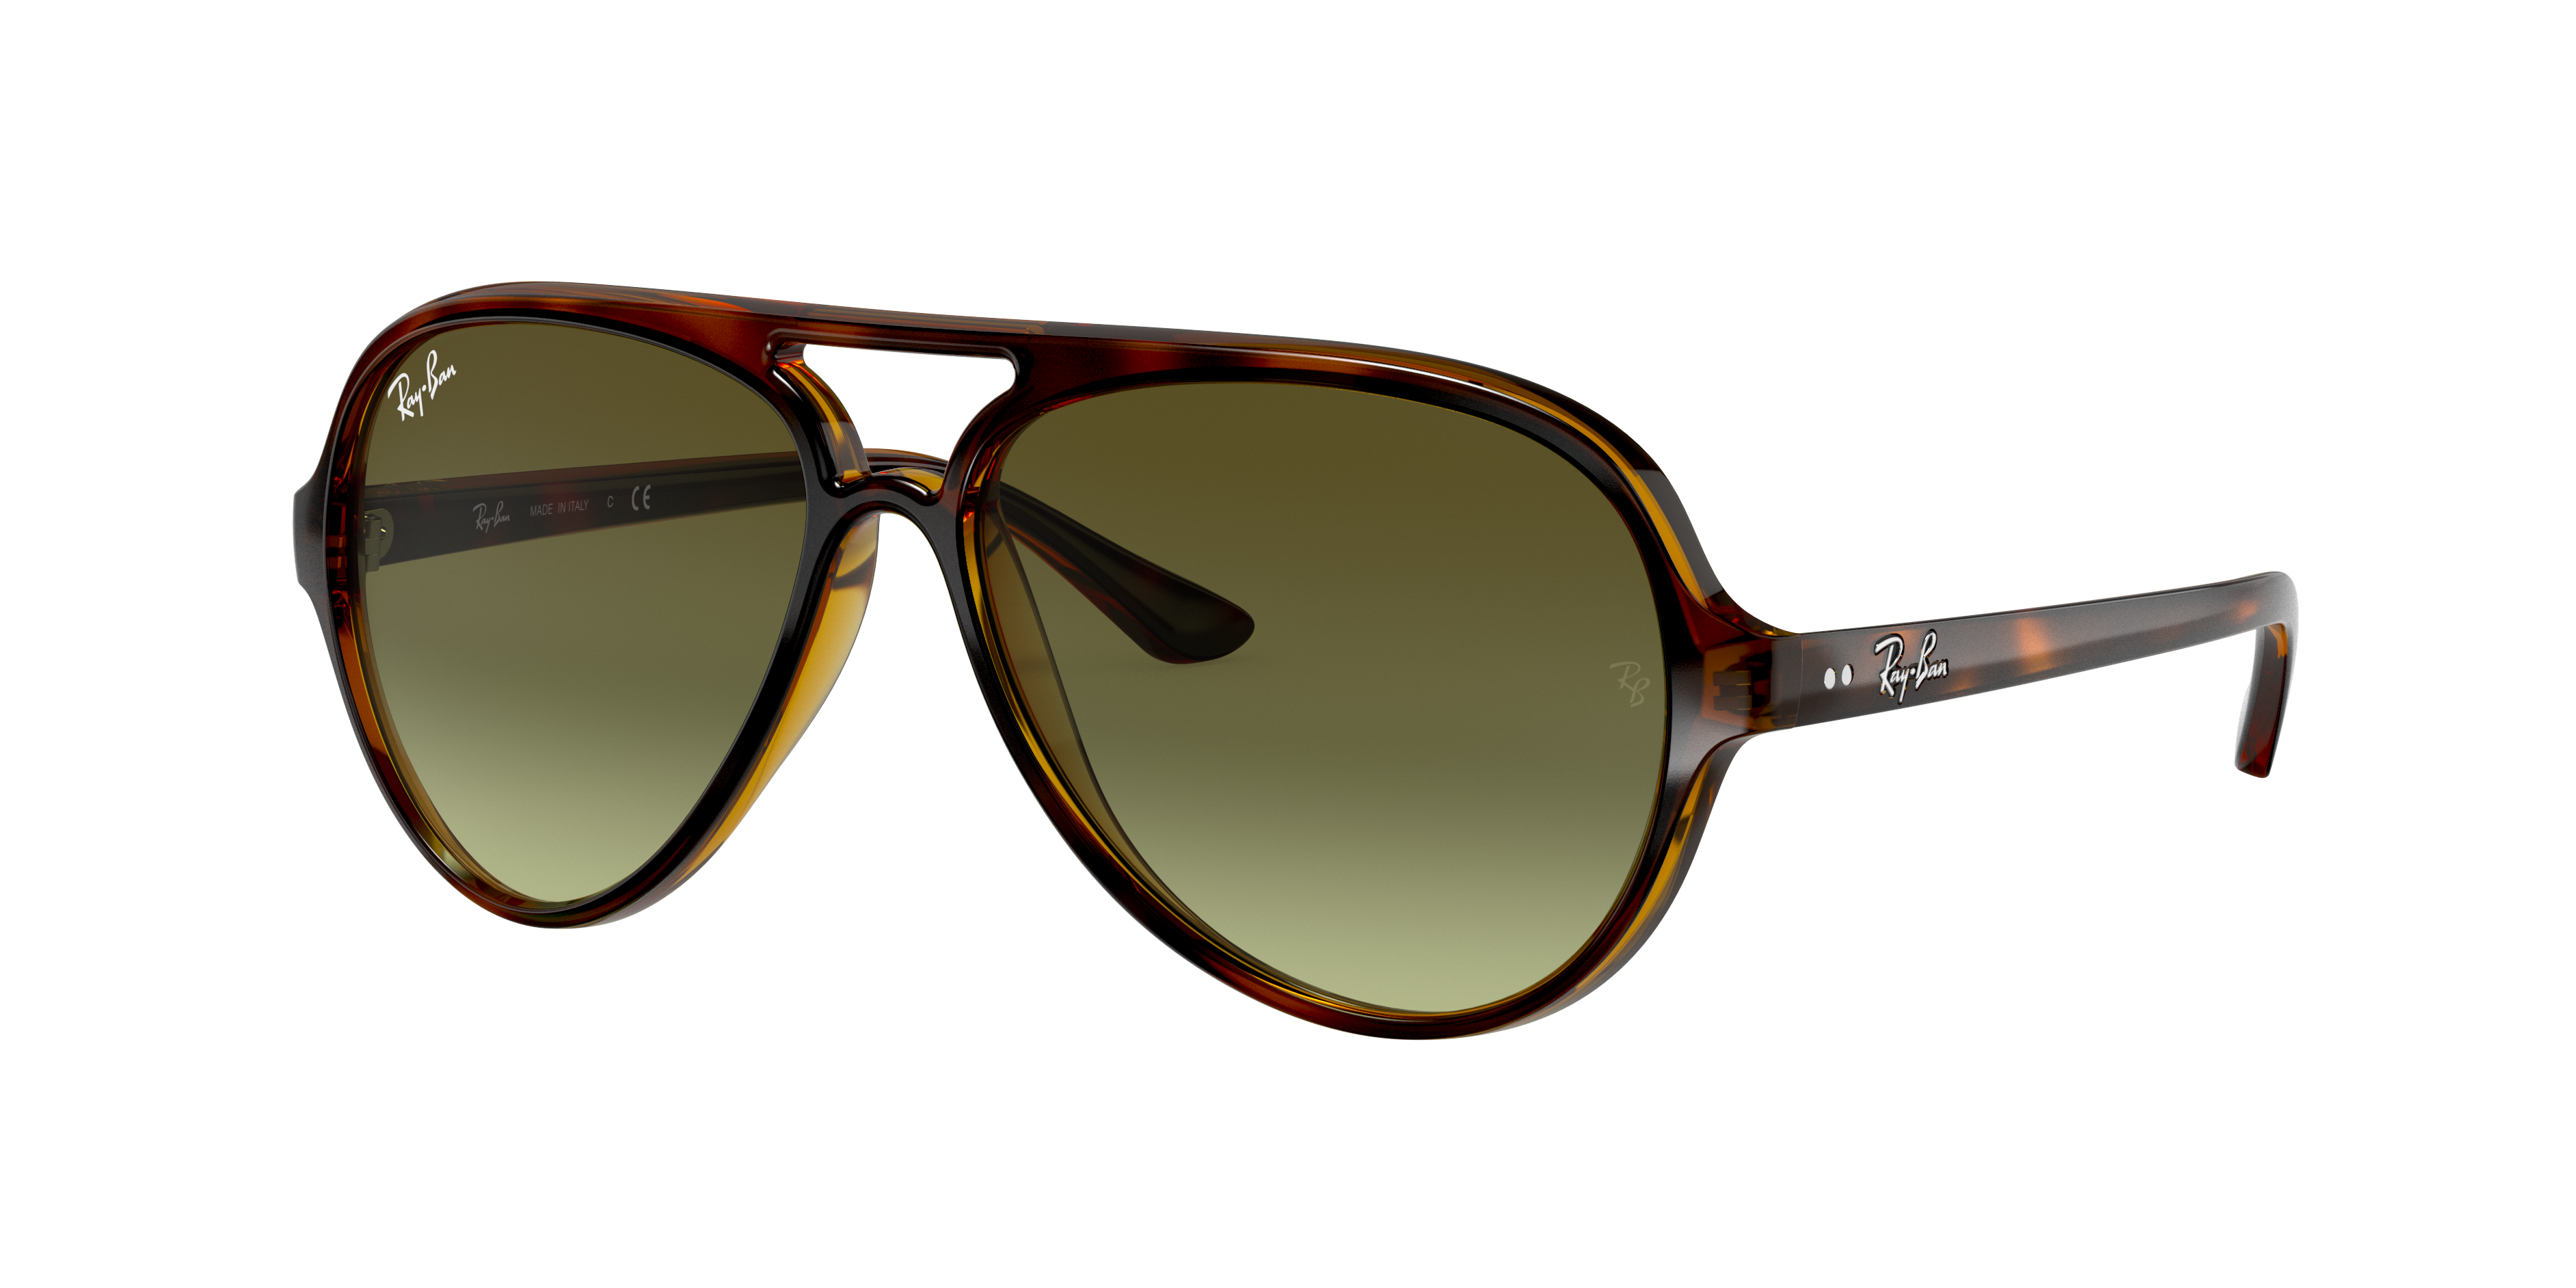 ray ban cats 5000 price in india